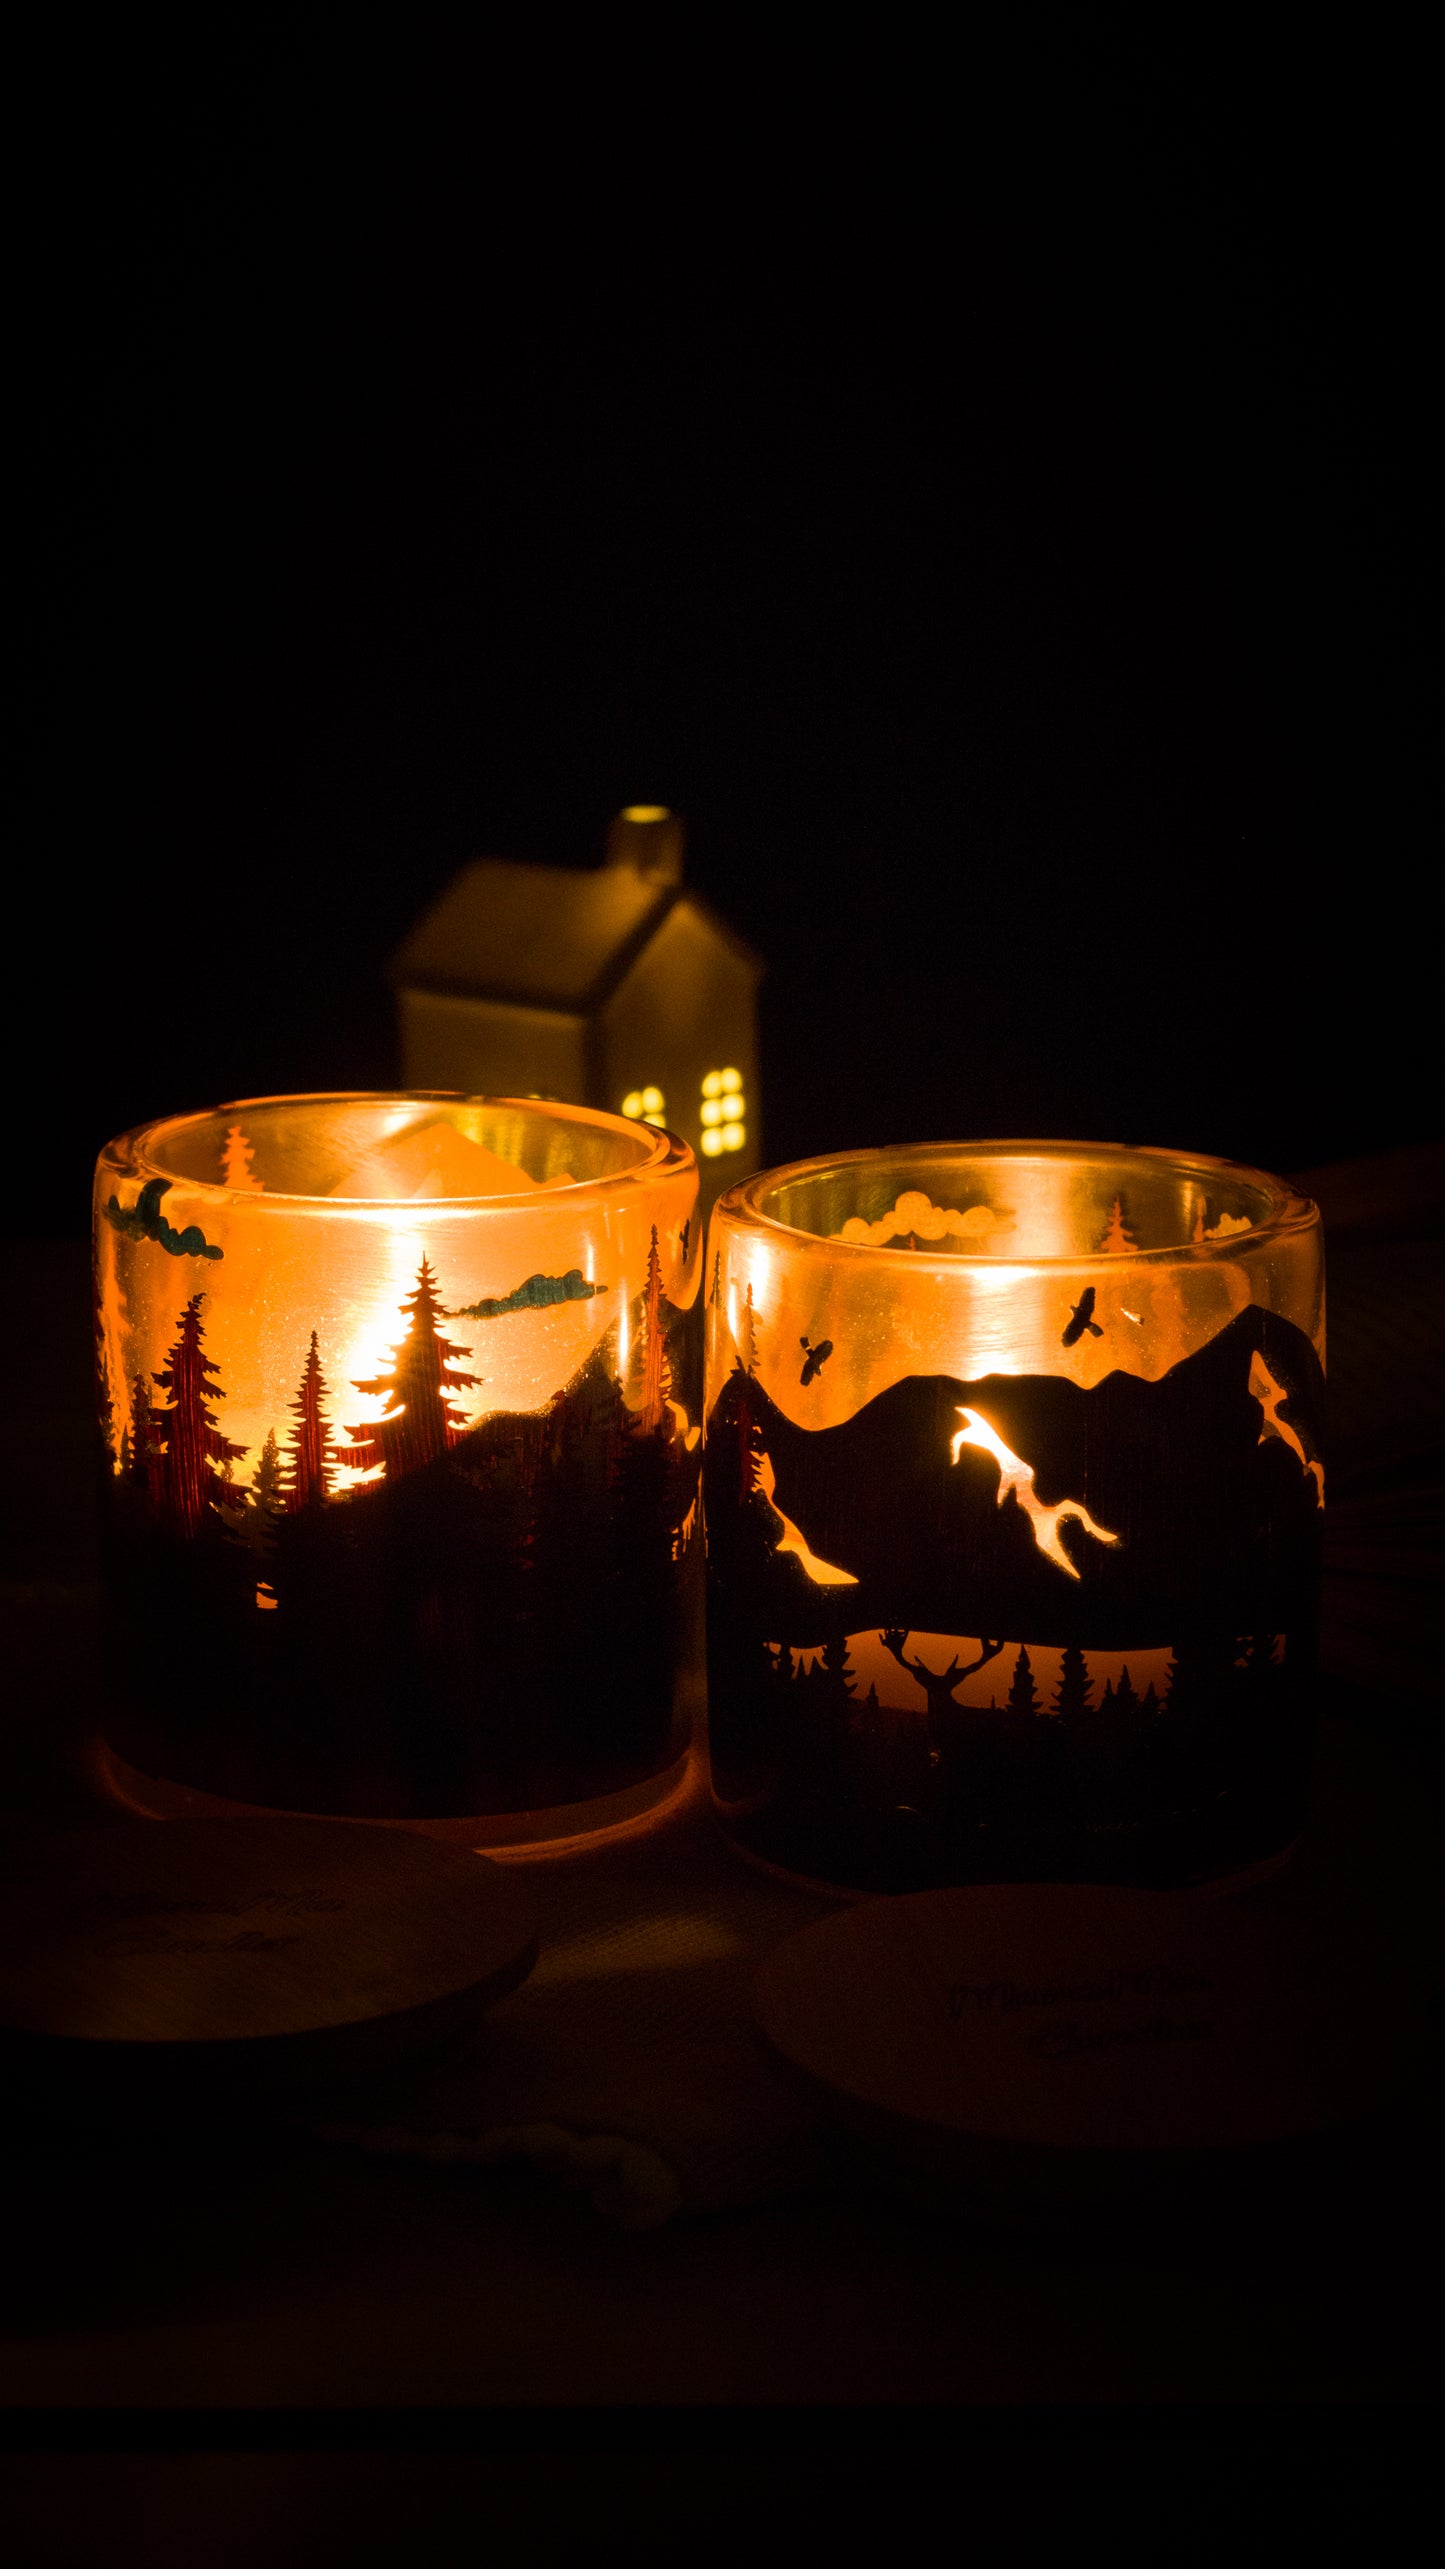 Soy Candle in Handmade Candlestick "Couple Deer in Woods"